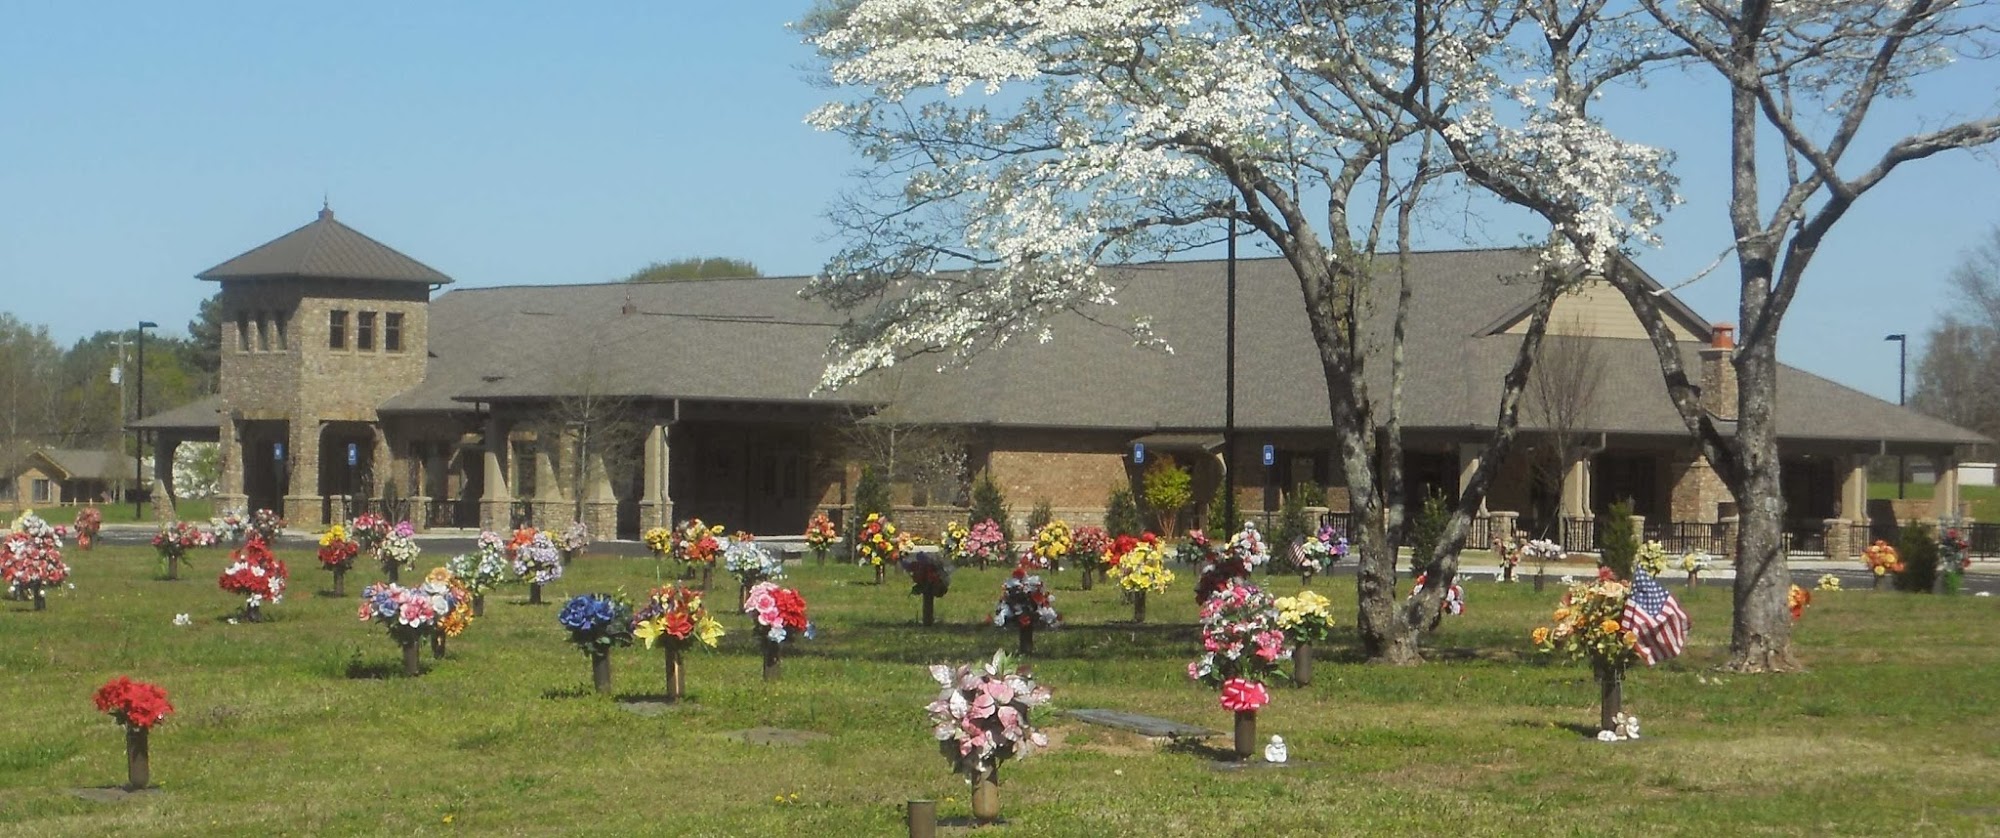 Scot Ward Funeral Services